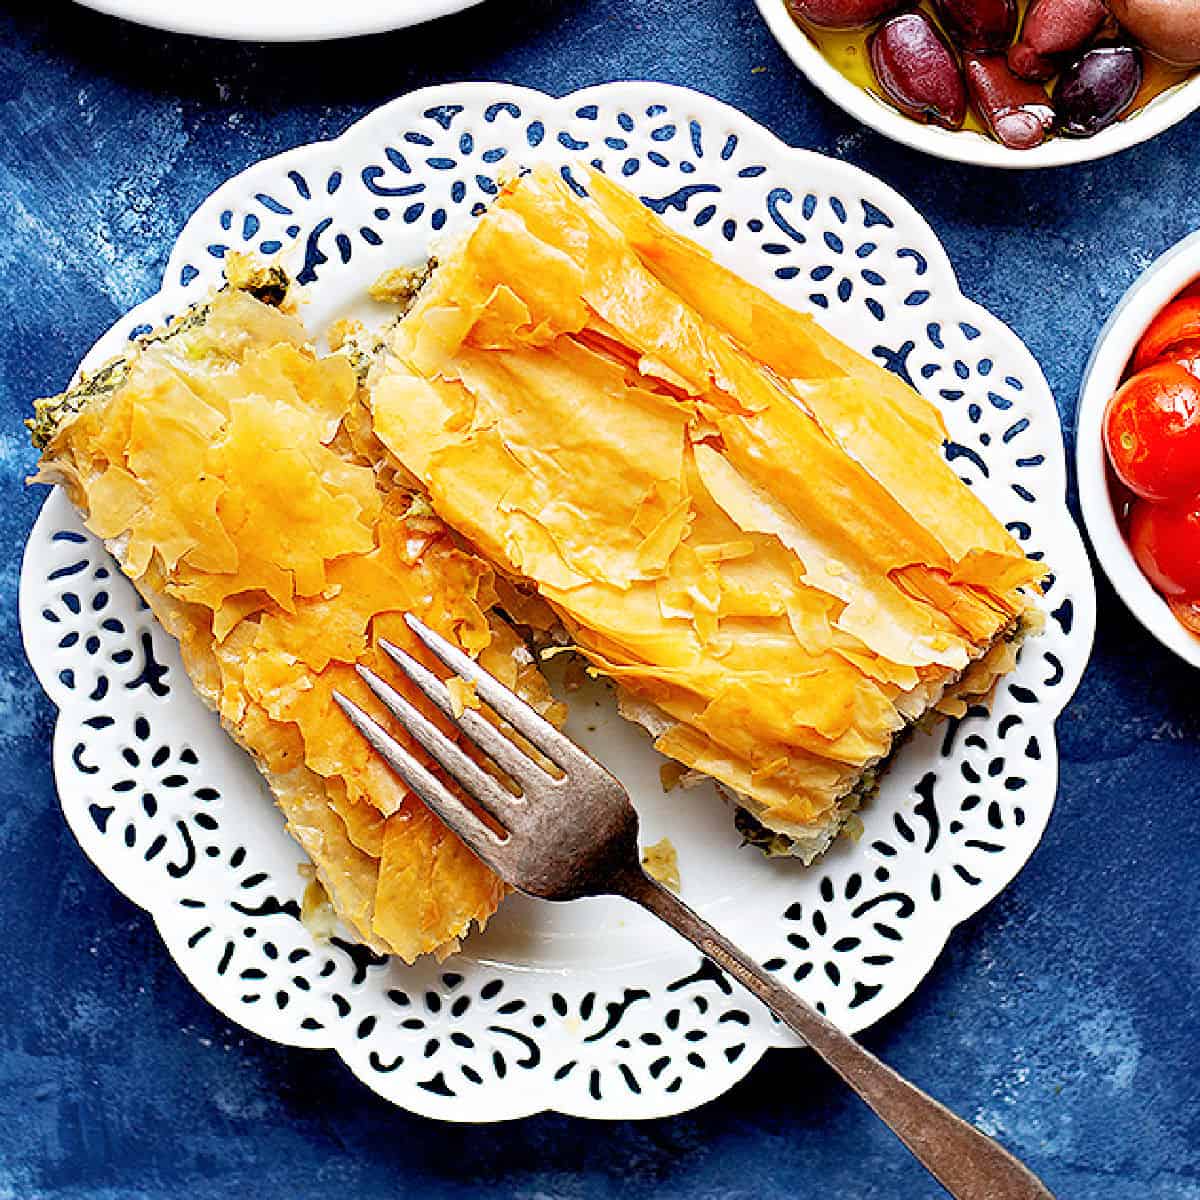 Here is a classic spanakopita recipe. This Greek spinach pie is made with phyllo dough, spinach and feta. It's packed with so much flavor. One slice is never enough! Be sure to check out our step by step tutorial and video. 